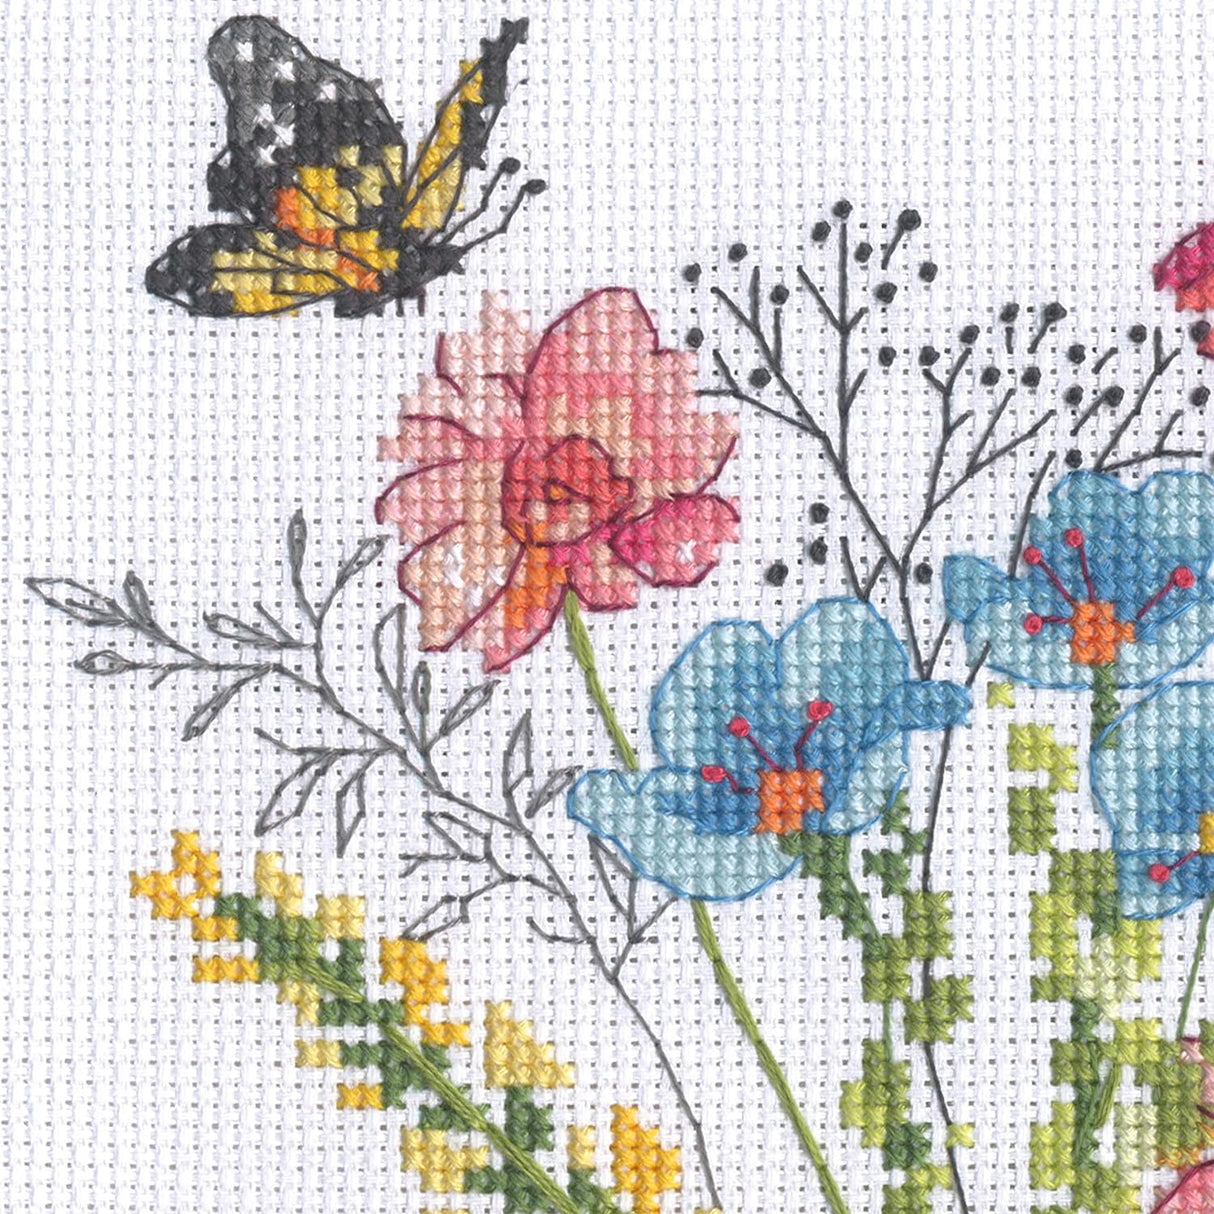 Cross Stitch Kit "Vases with Wild Flowers" 70-35431 by Dimensions